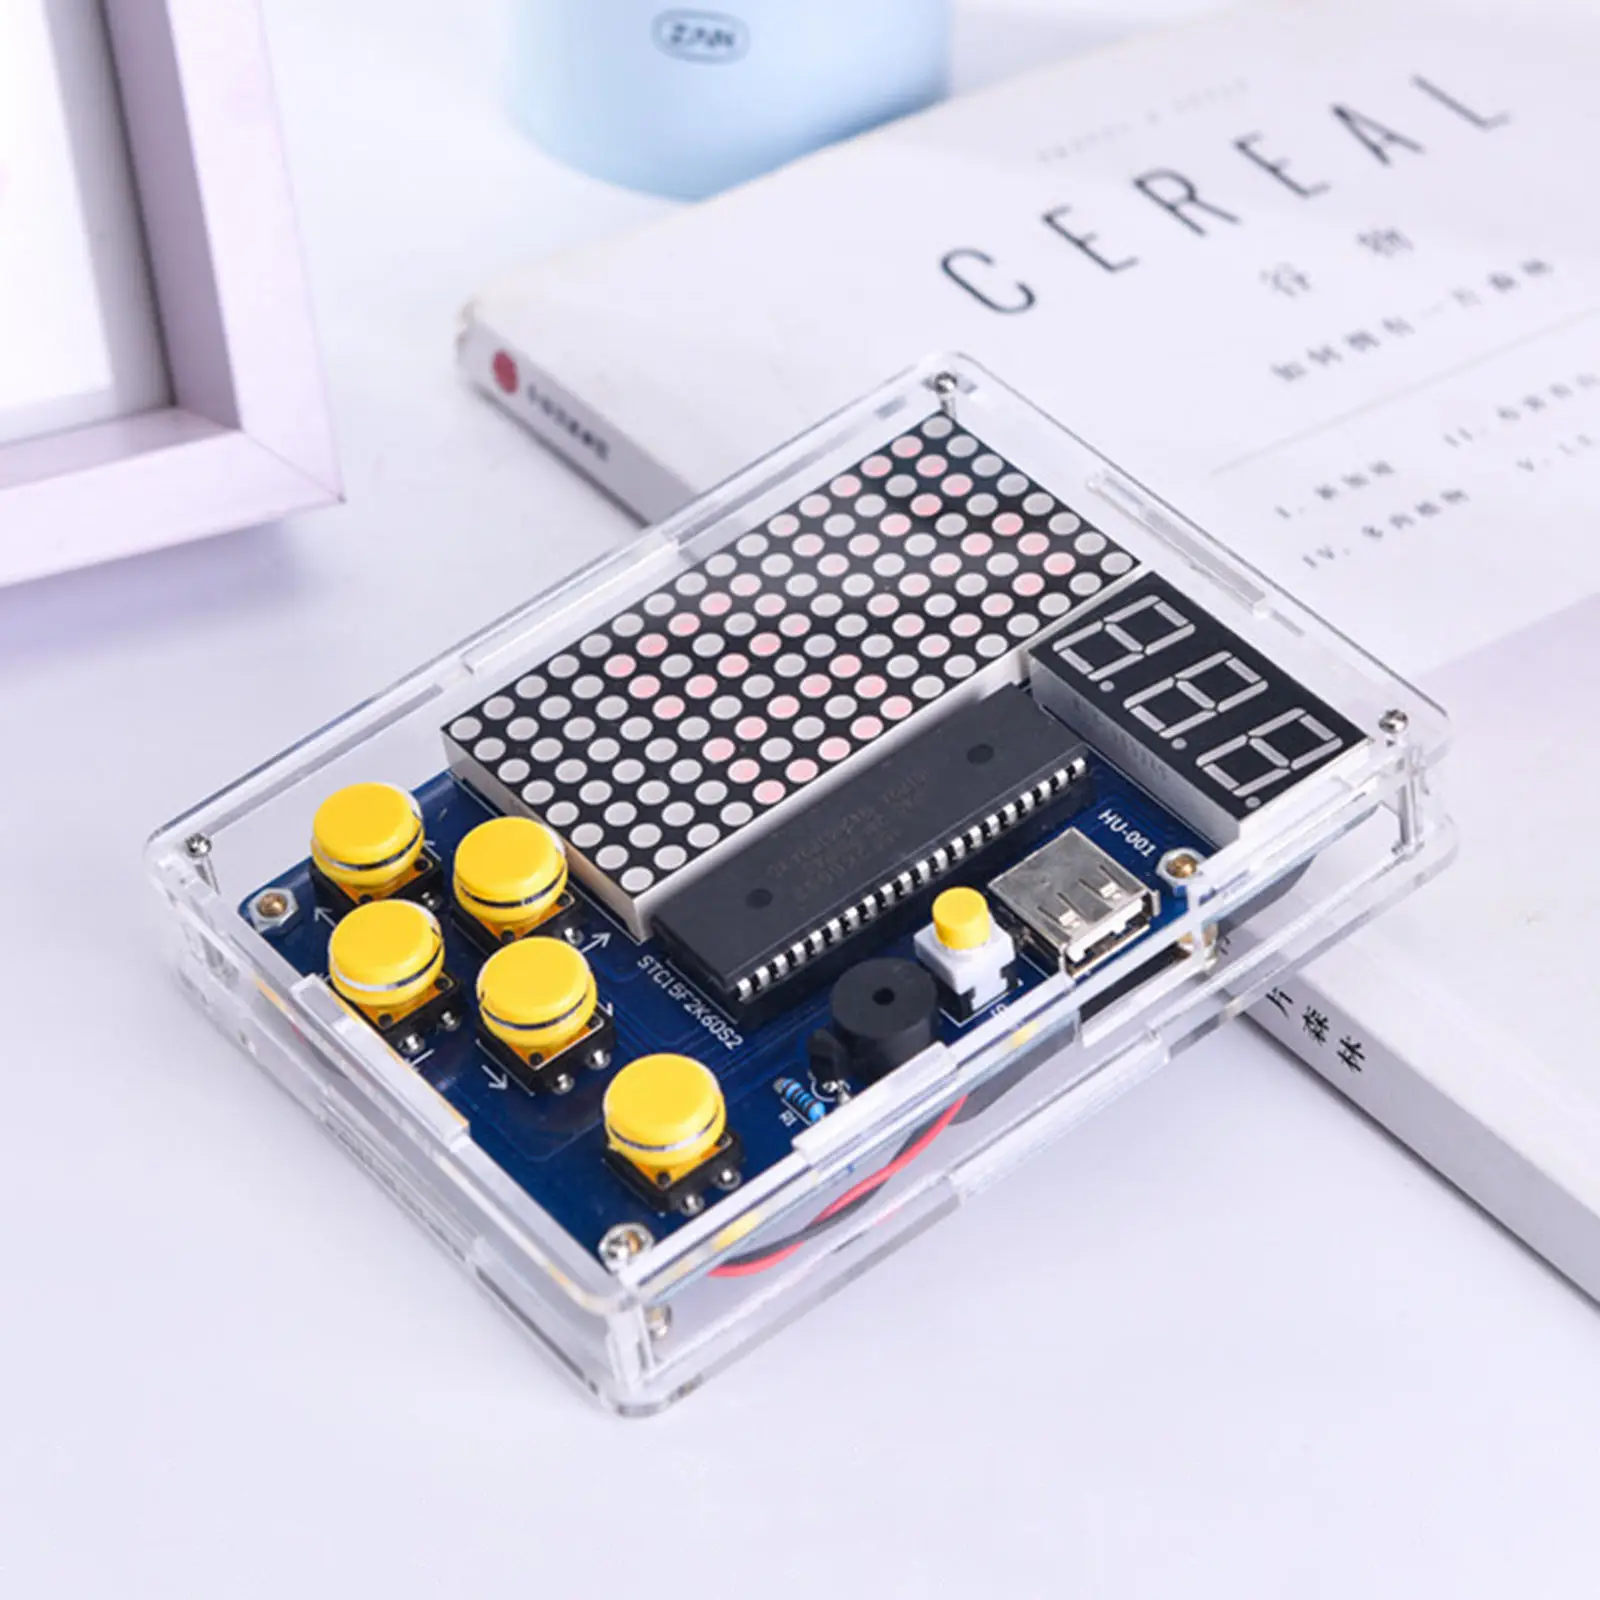 New Acrylic DIY Game Kit Electronic Soldering Set Video Game Machine Kids Toys Gift Game Console Kits